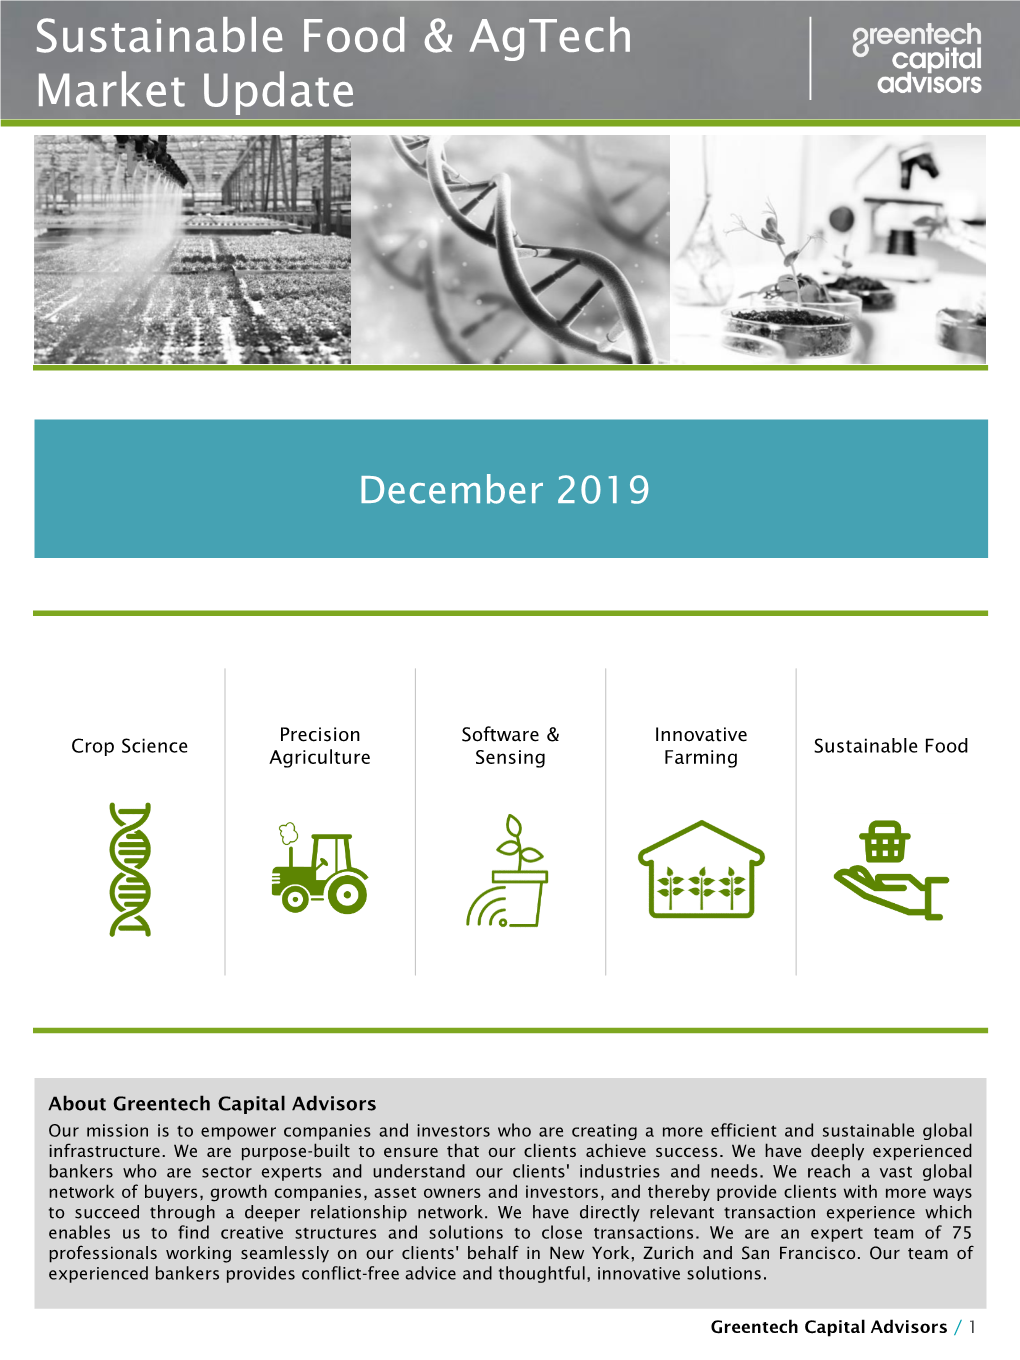 December 2019 Sustainable Food & Agtech